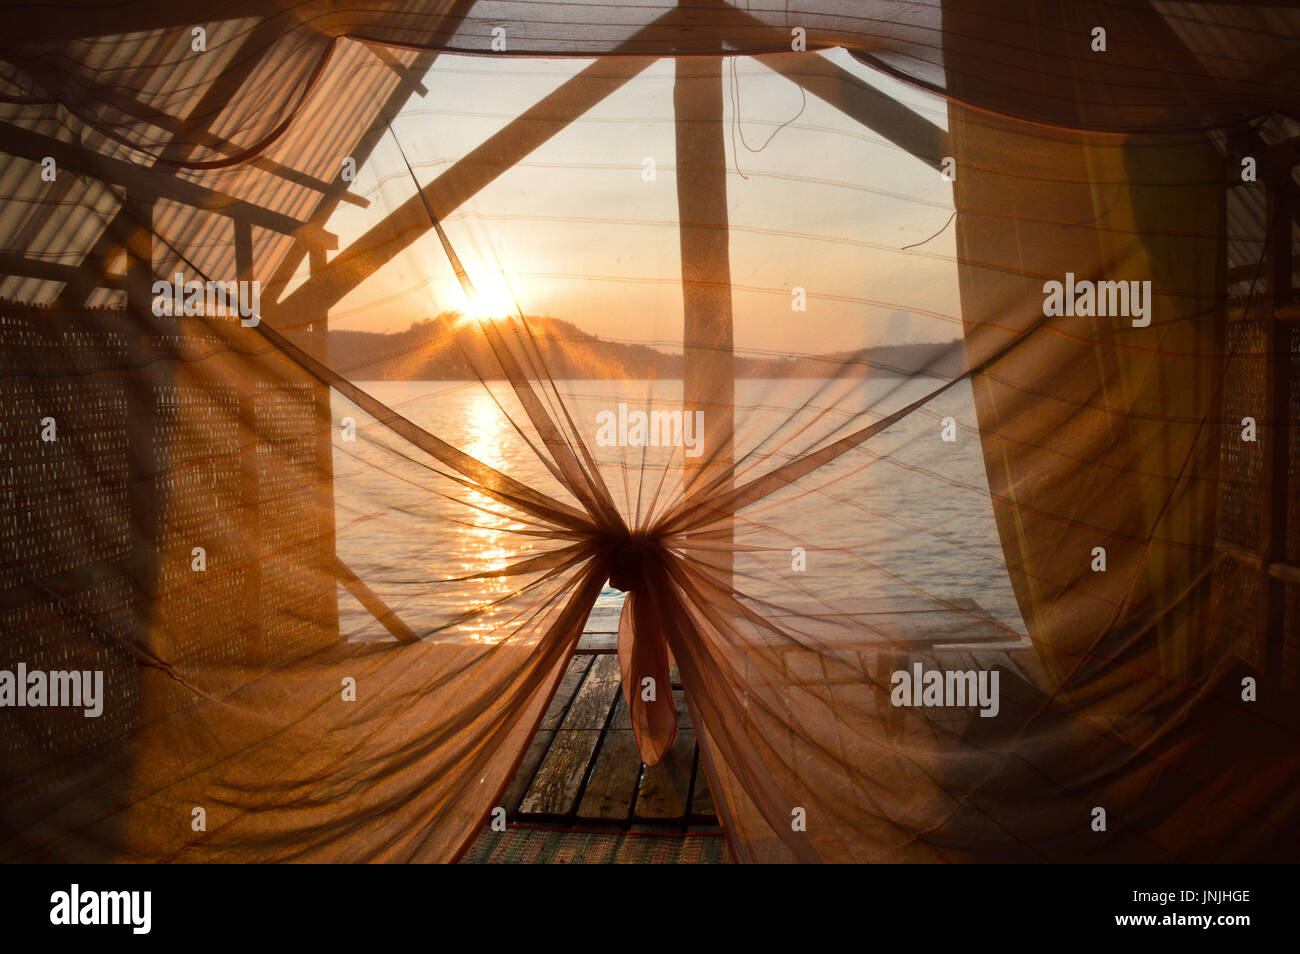 View Of The Sunset From The Inside Of A Beach Cottage With Canopy